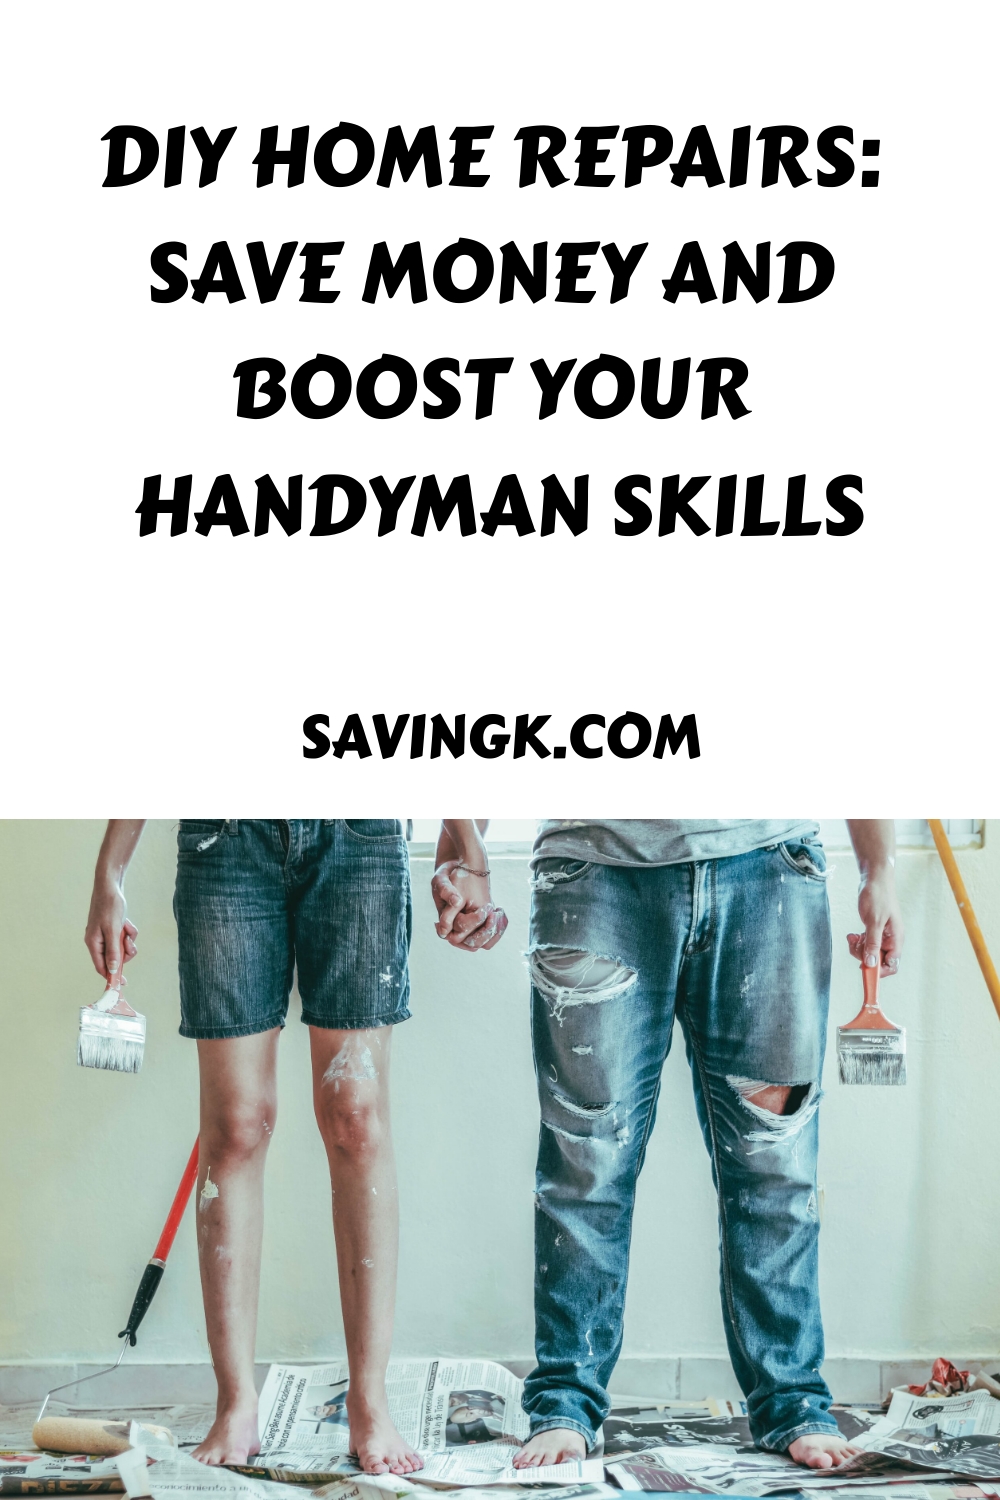 Repairs: Save Money and Boost Your Handyman Skills